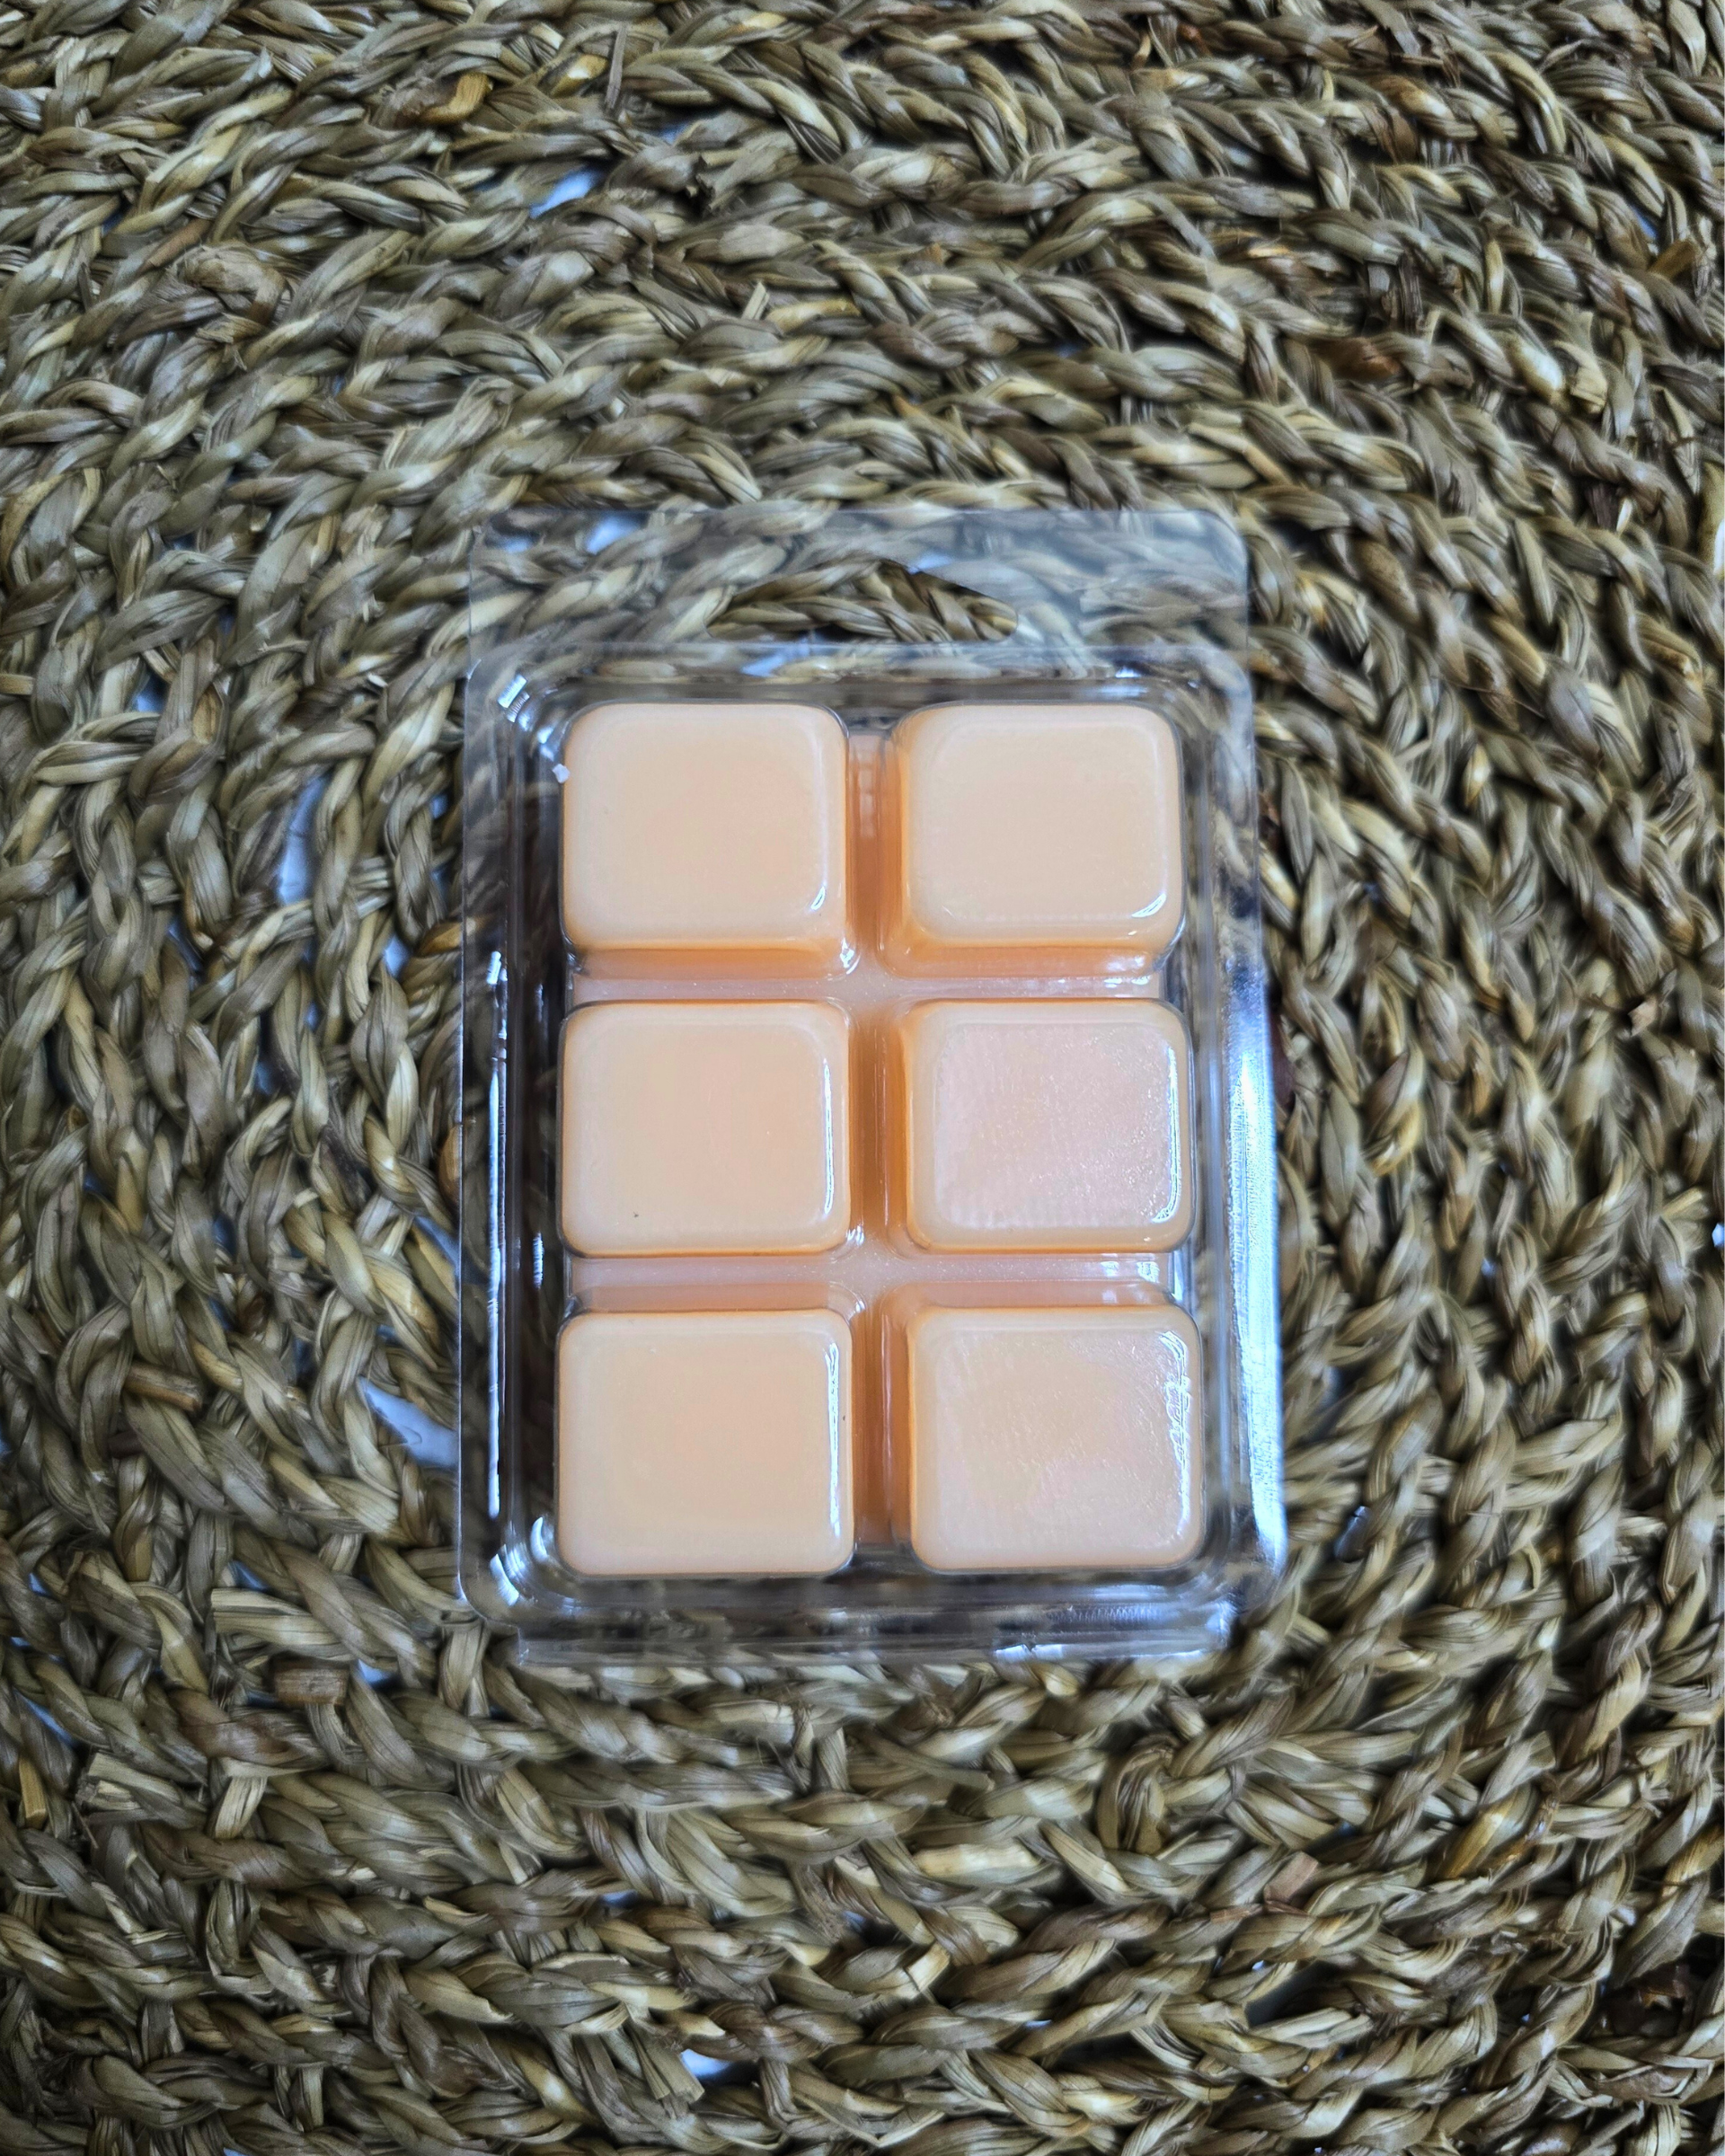 There's something magical about lighting a candle that takes you back to sun-drenched days and warm, nostalgic moments. Our Citrus &amp; Sunshine Soy &nbsp;Wax Melts is crafted to do just that, filling your space with the vibrant and comforting aromas of Blood Orange, Goji Berry, and Sandalwood.&nbsp; 2.5 oz net weight. Citrus &amp; Sunshine Soy Wax Melts is in a 6 cubes recyclable clamshell.